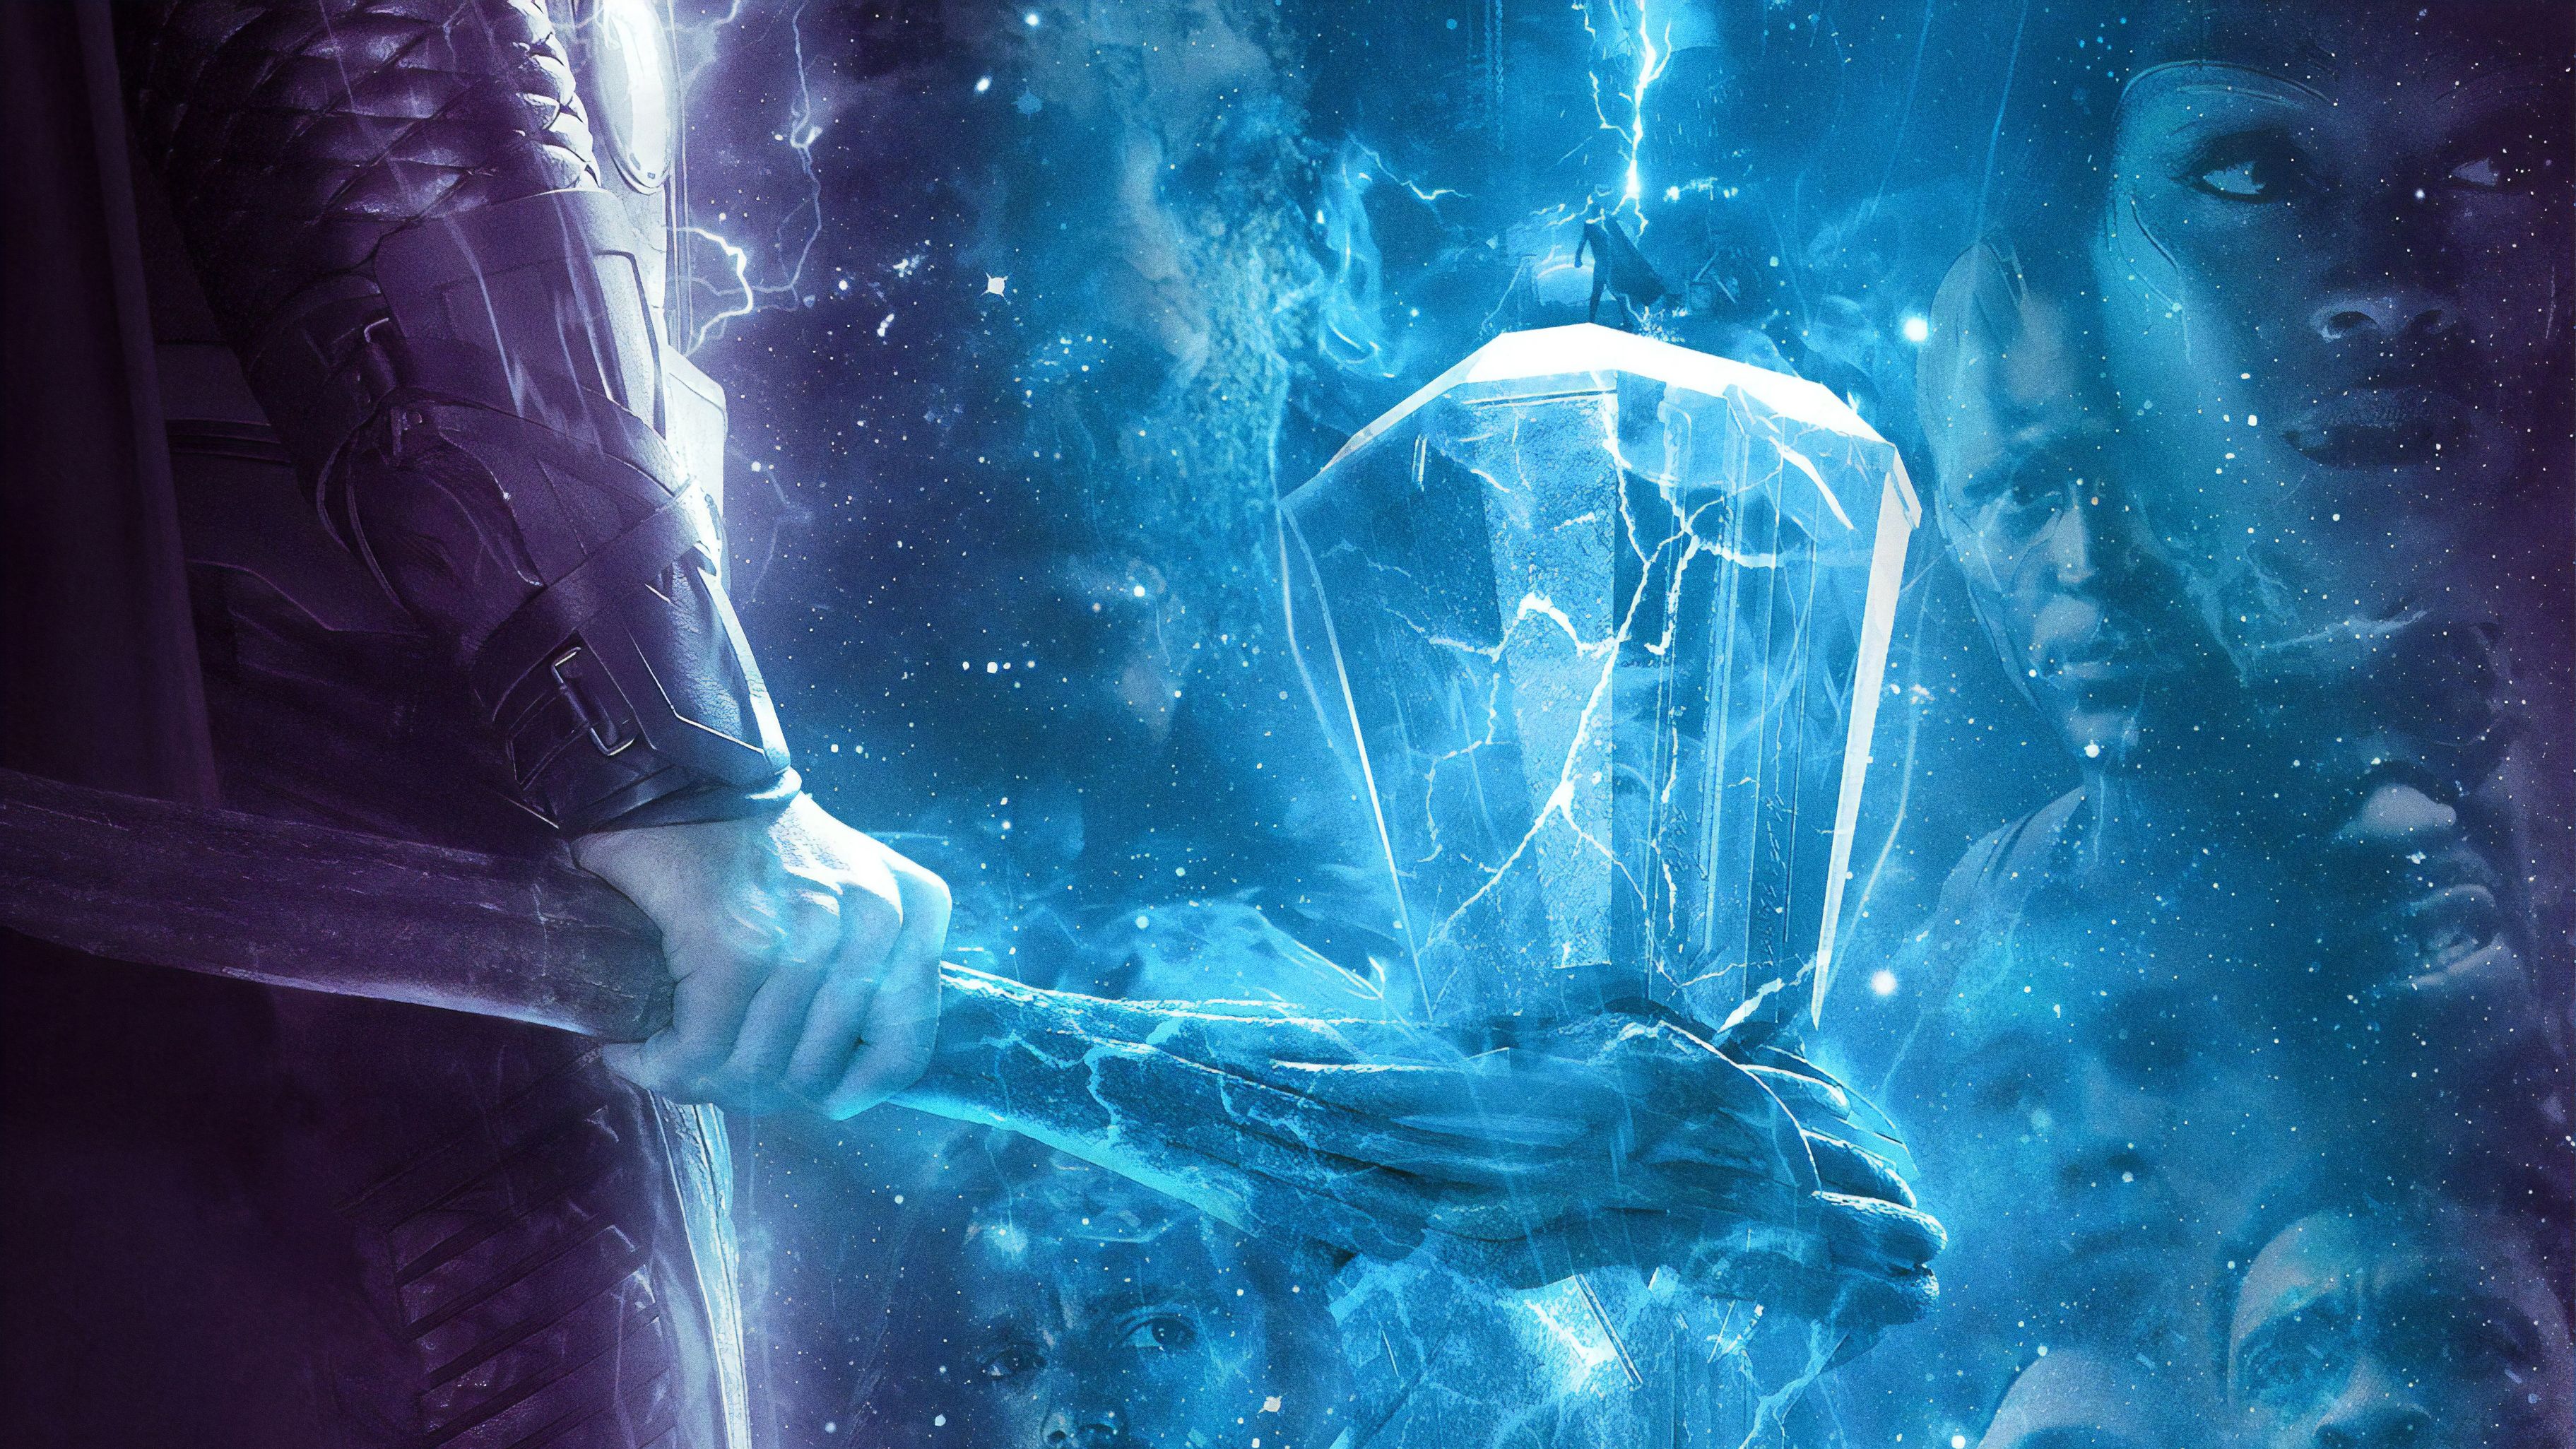 Avengers Endgame Thor Hammer Poster 4k 1440P Resolution HD 4k Wallpaper, Image, Background, Photo and Picture